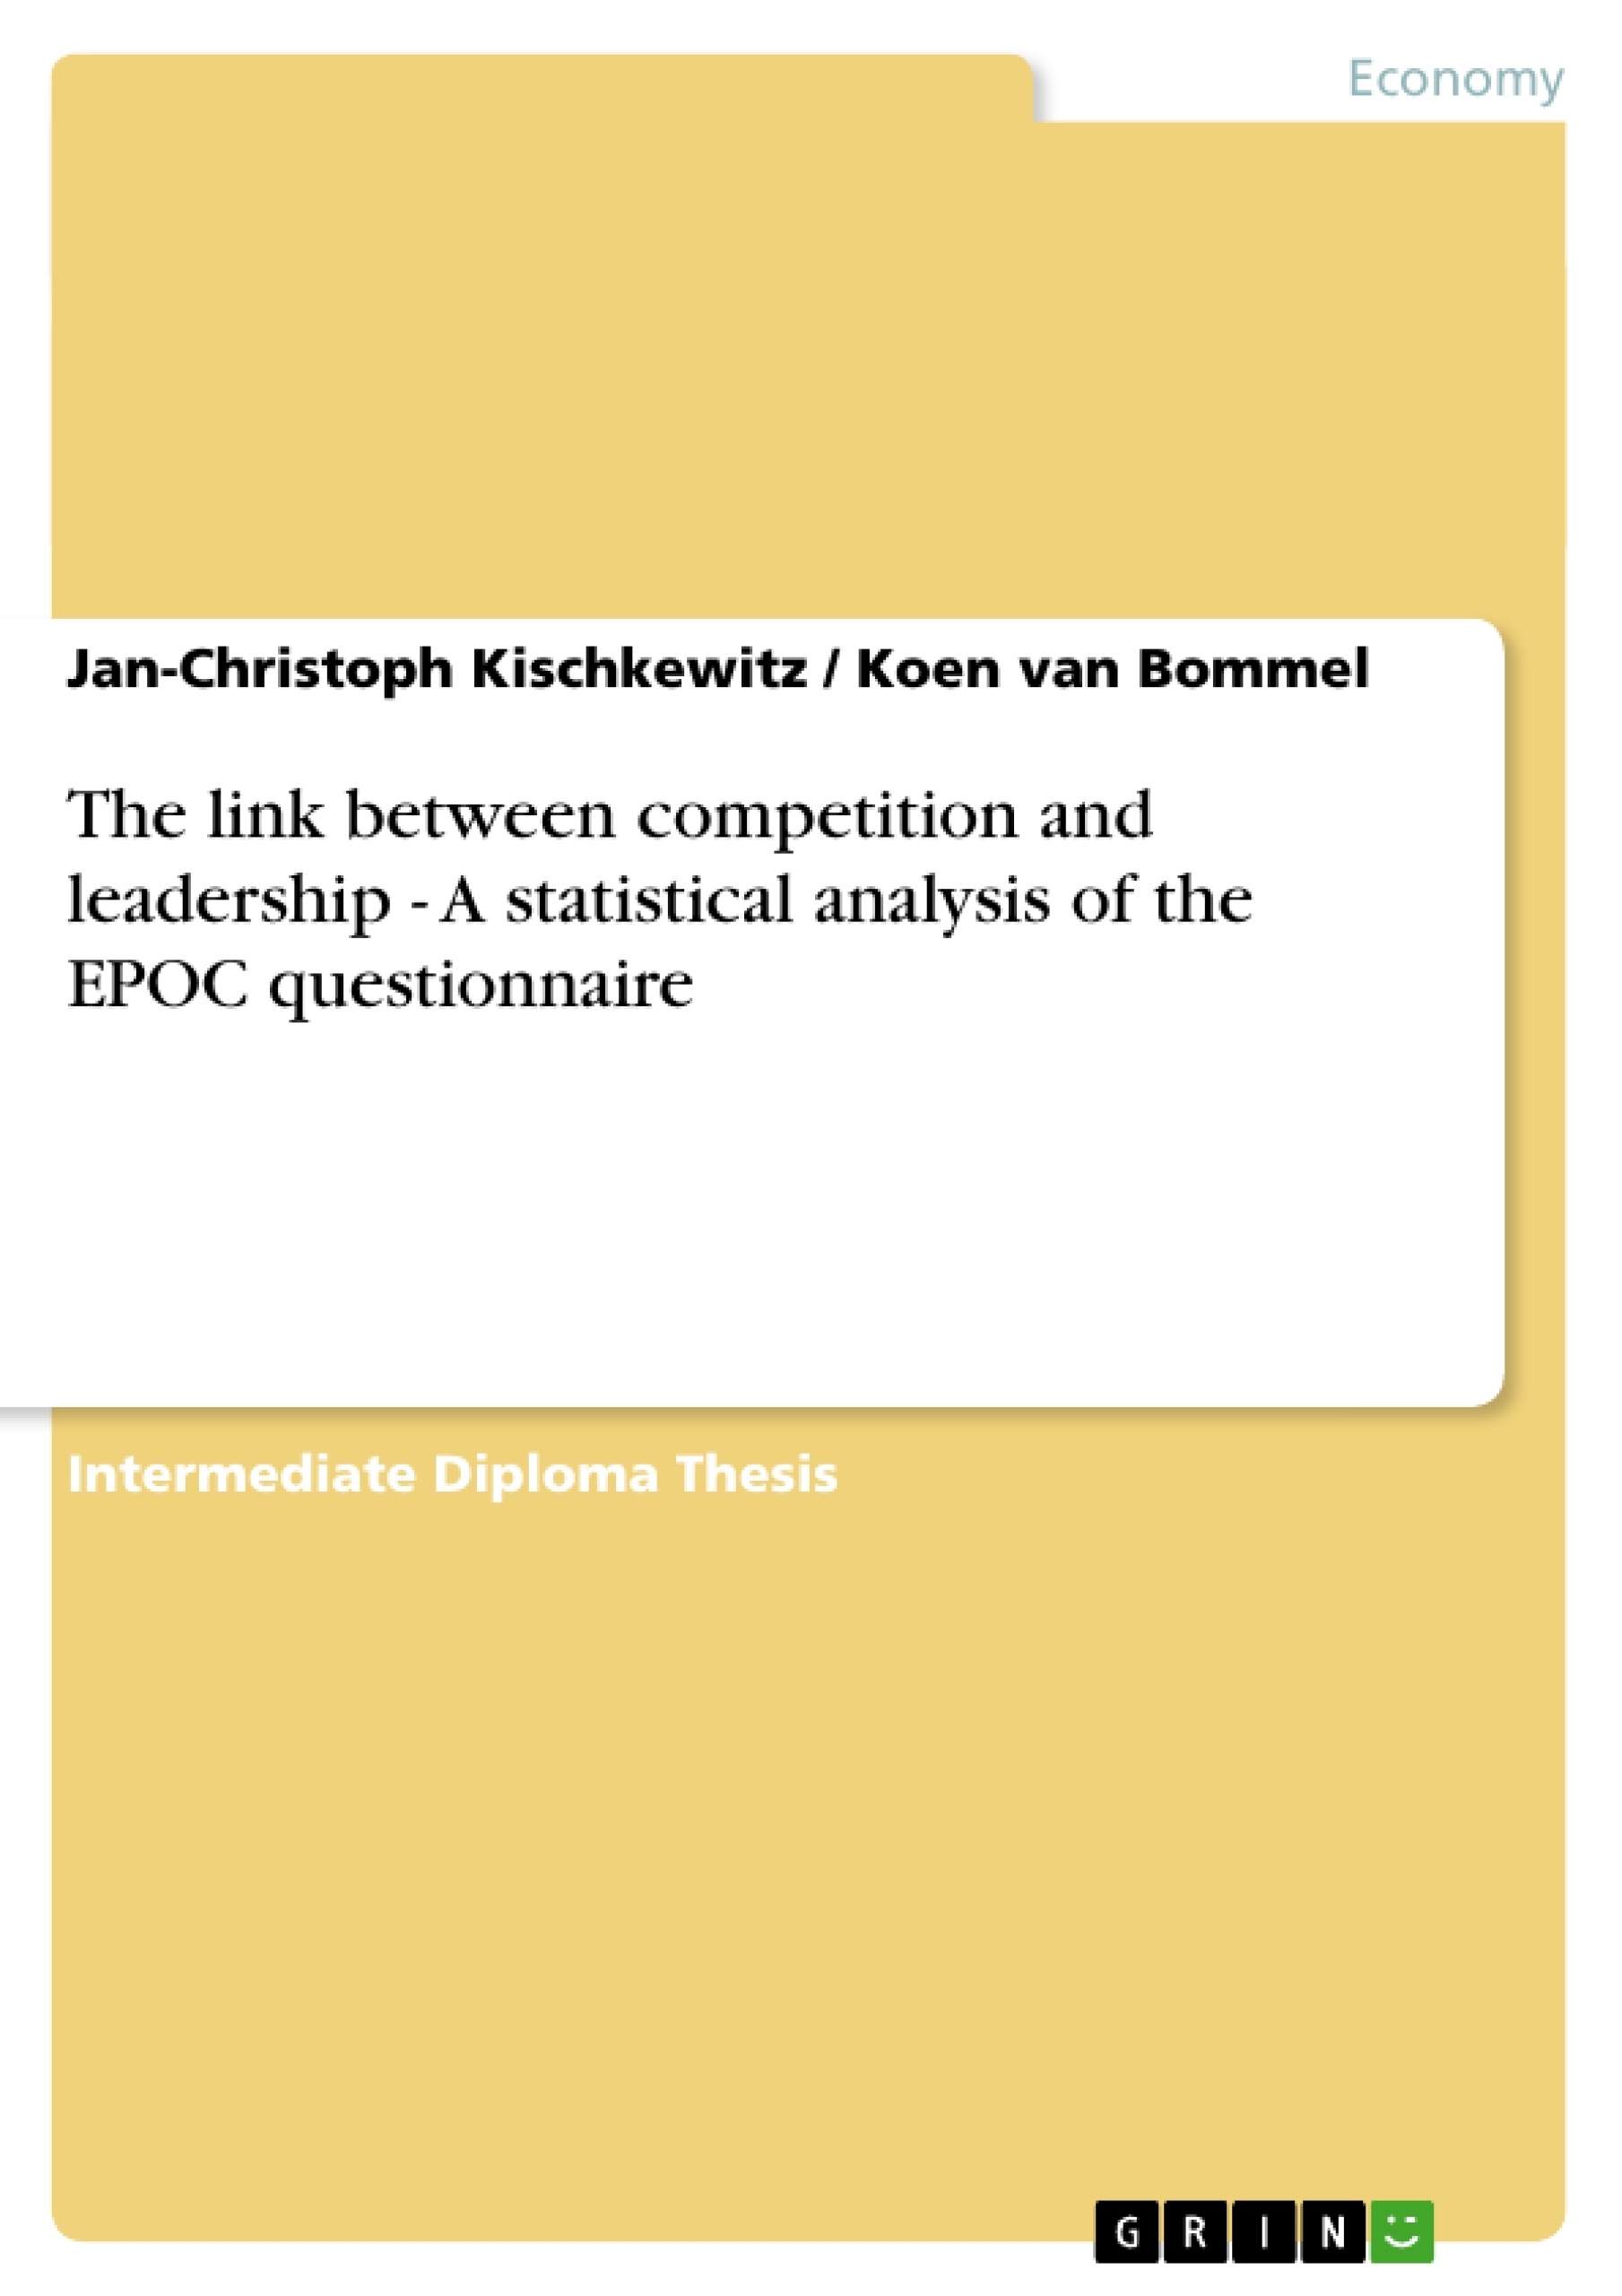 Titel: The link between competition and leadership - A statistical analysis of the EPOC questionnaire